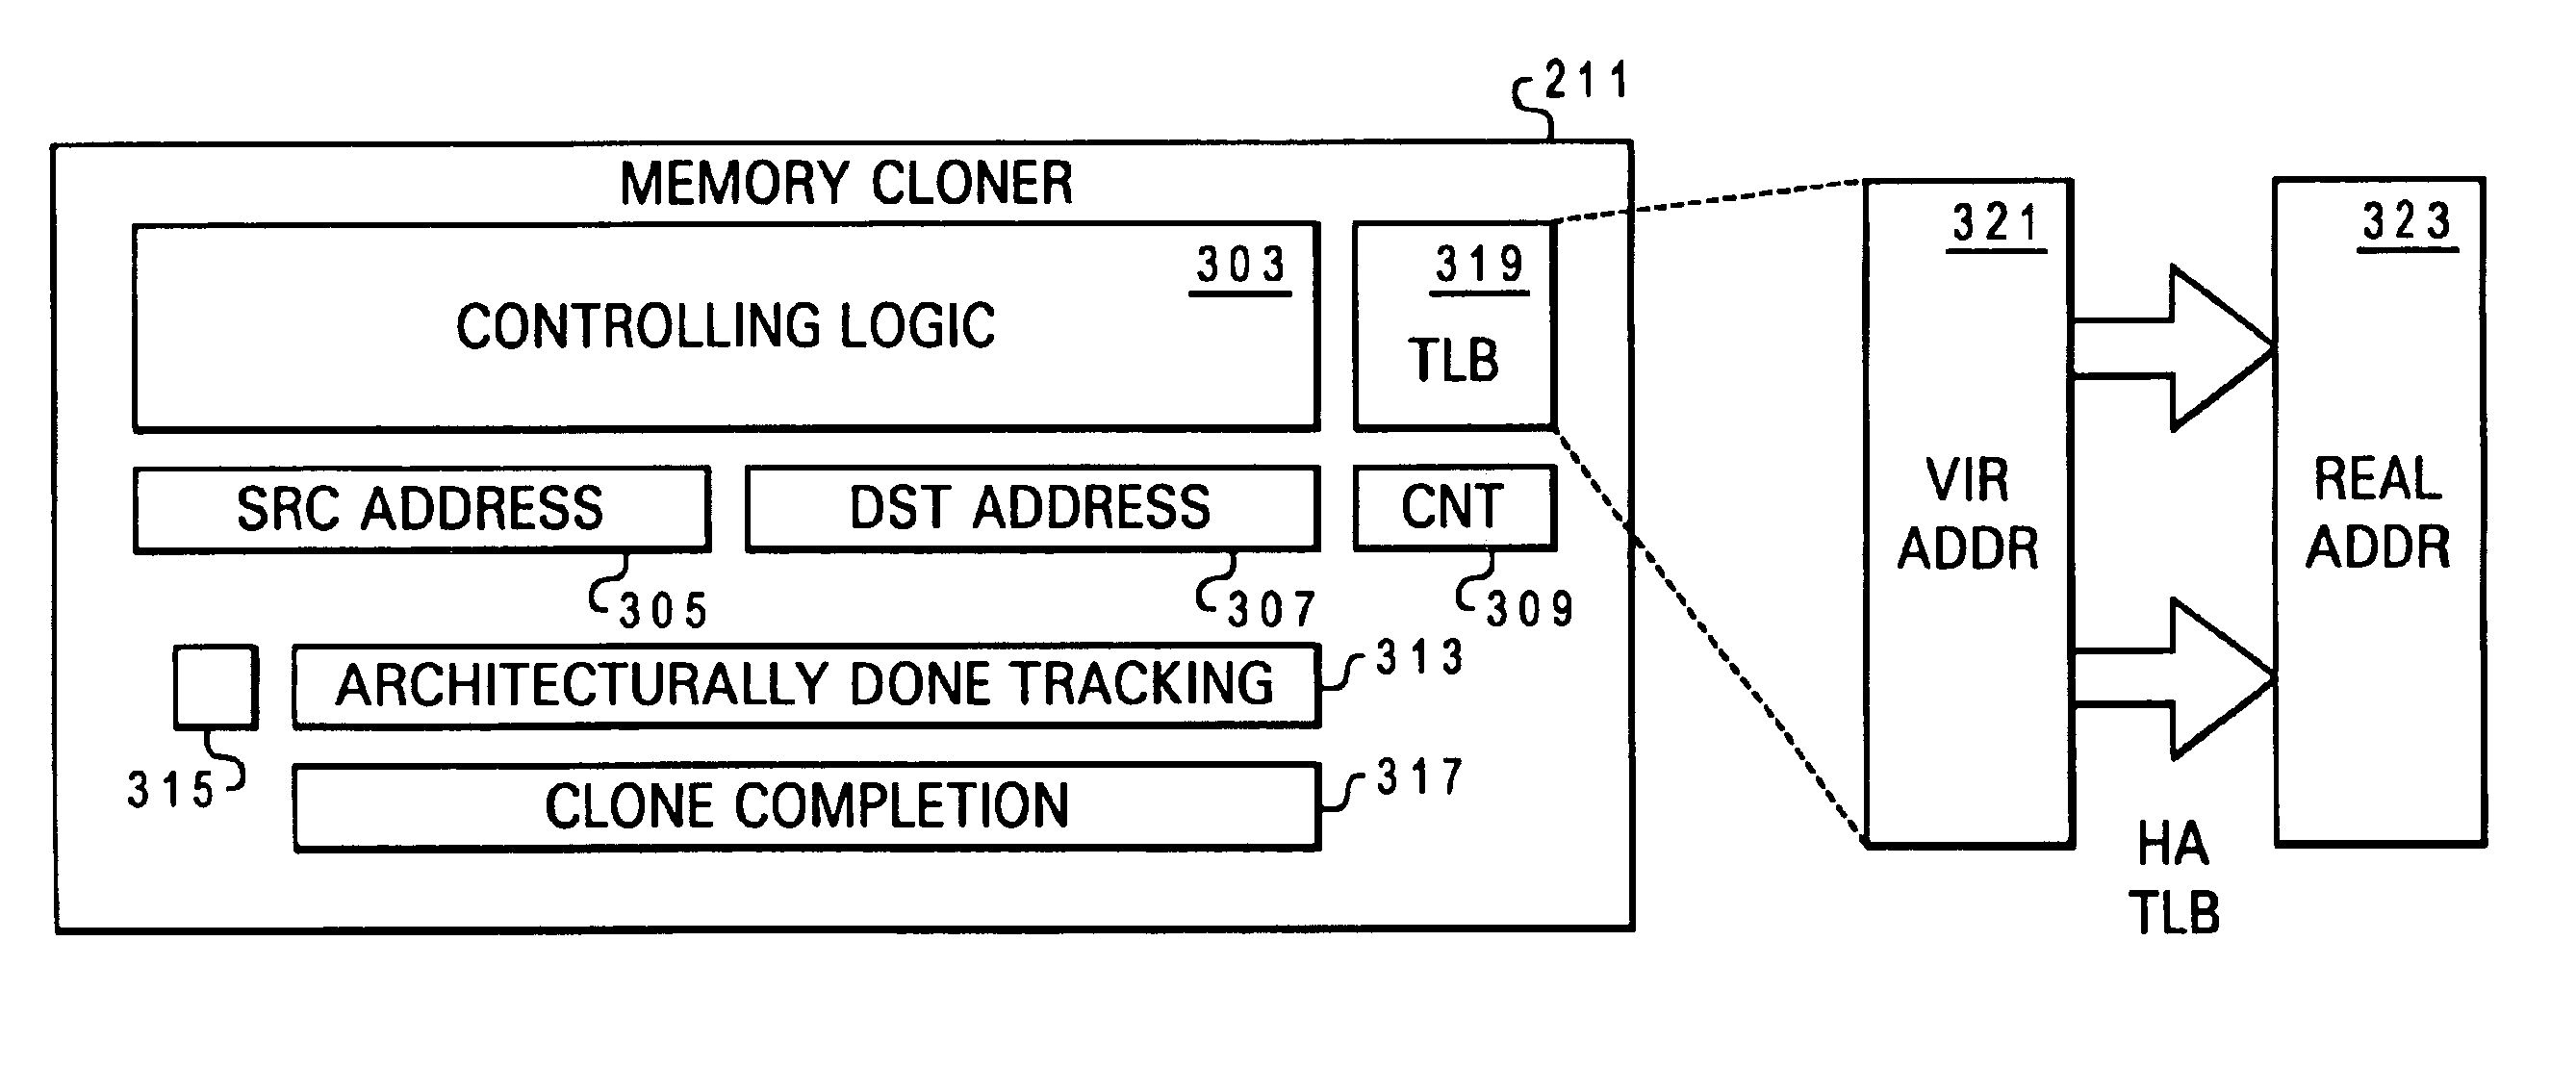 Dynamic software accessibility to a microprocessor system with a high speed memory cloner